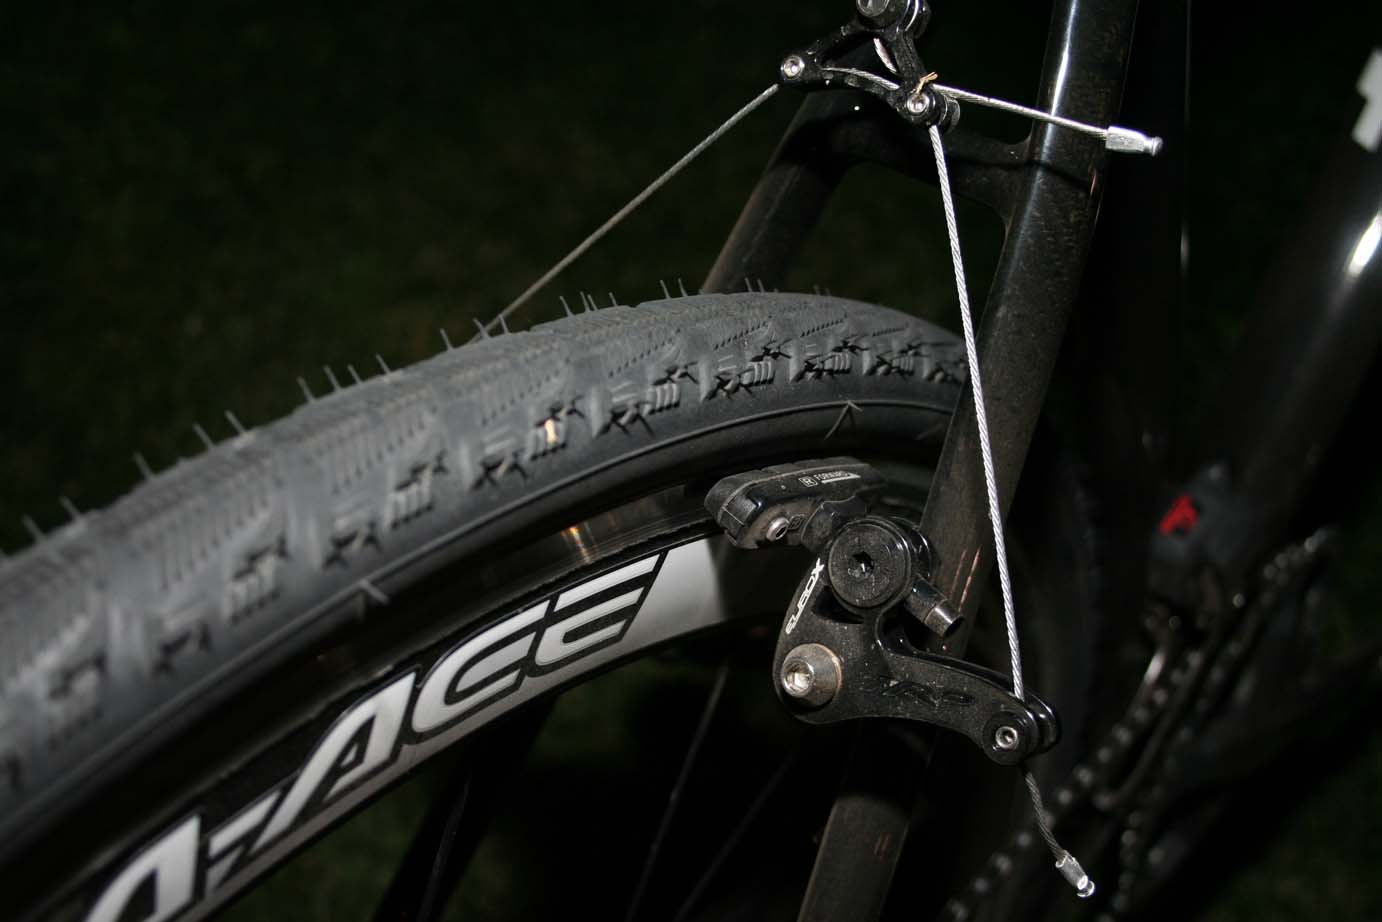 The aluminum brake track added stopping power, but also added weight. by Andrew Yee